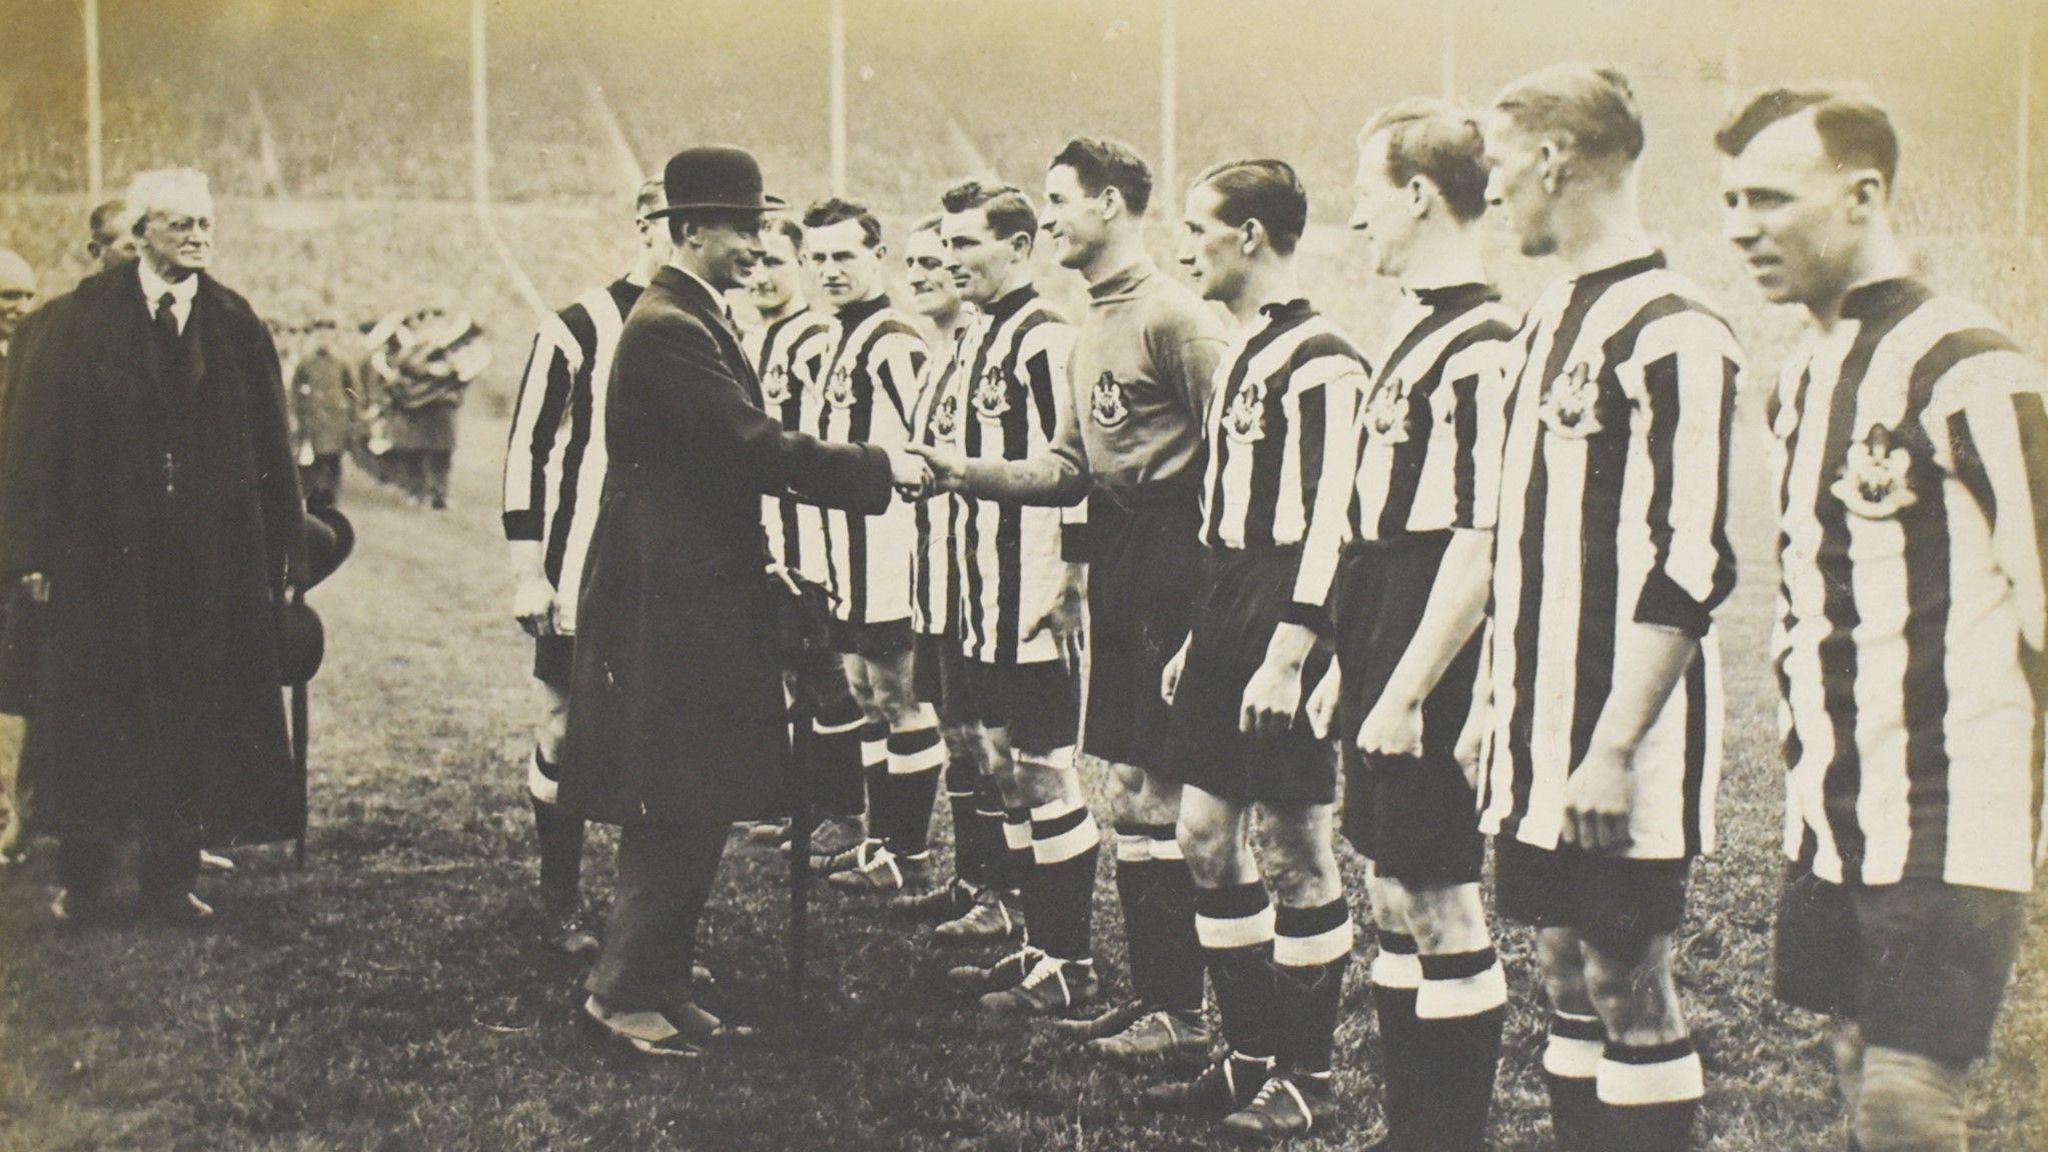 Players stand in a line in Newcastle black and white kit. The king is in a bowler hat and shakes one of the player's hand.